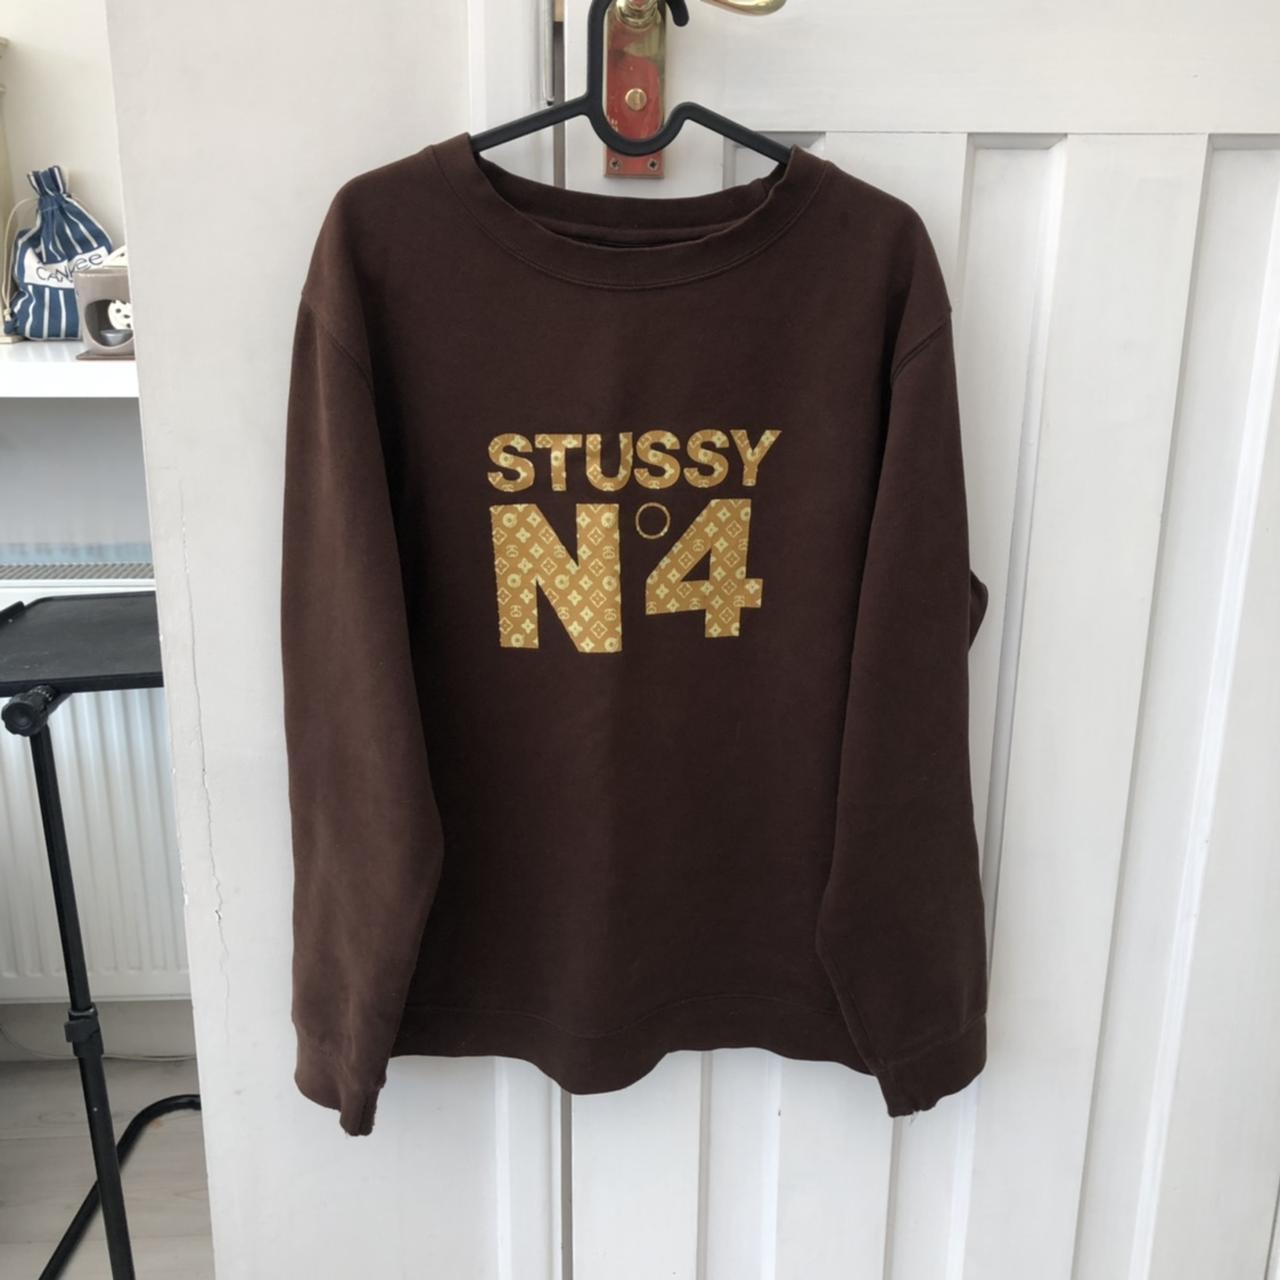 •, - Stussy x Louis Vuitton Sweater , - Rare piece for